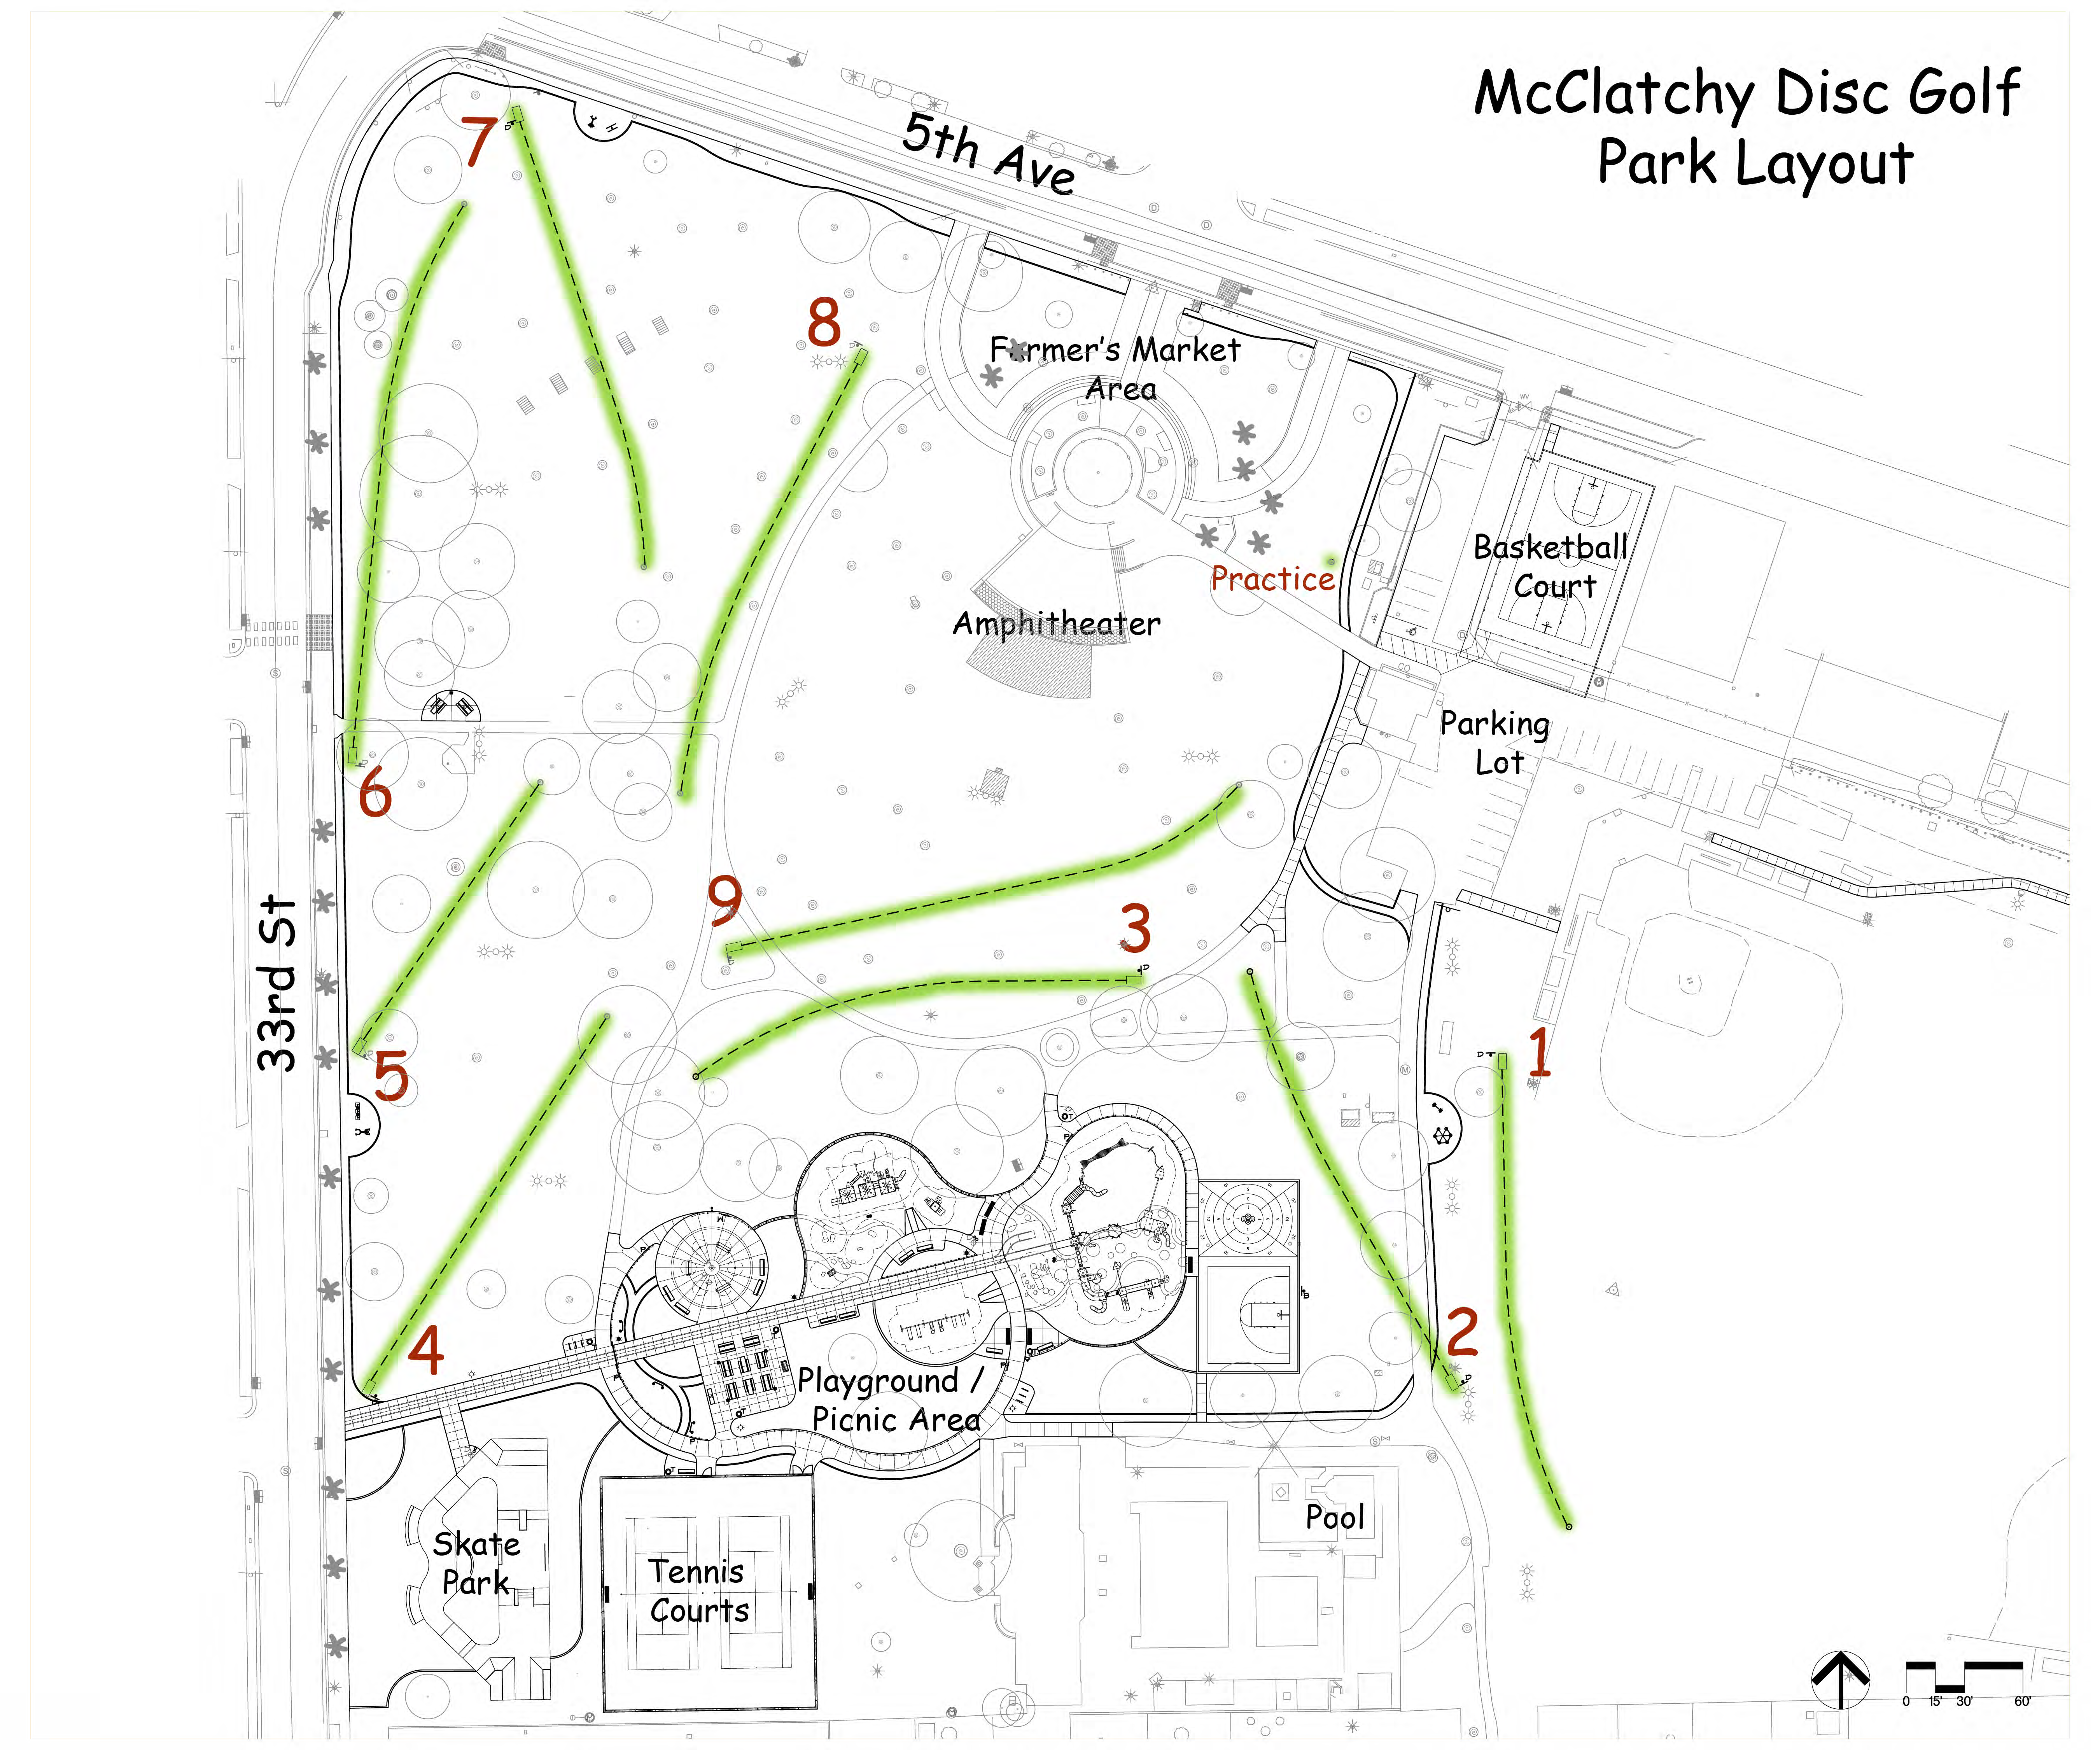 McClatchy Park and Disc Golf Course Grand Opening October 18th 7